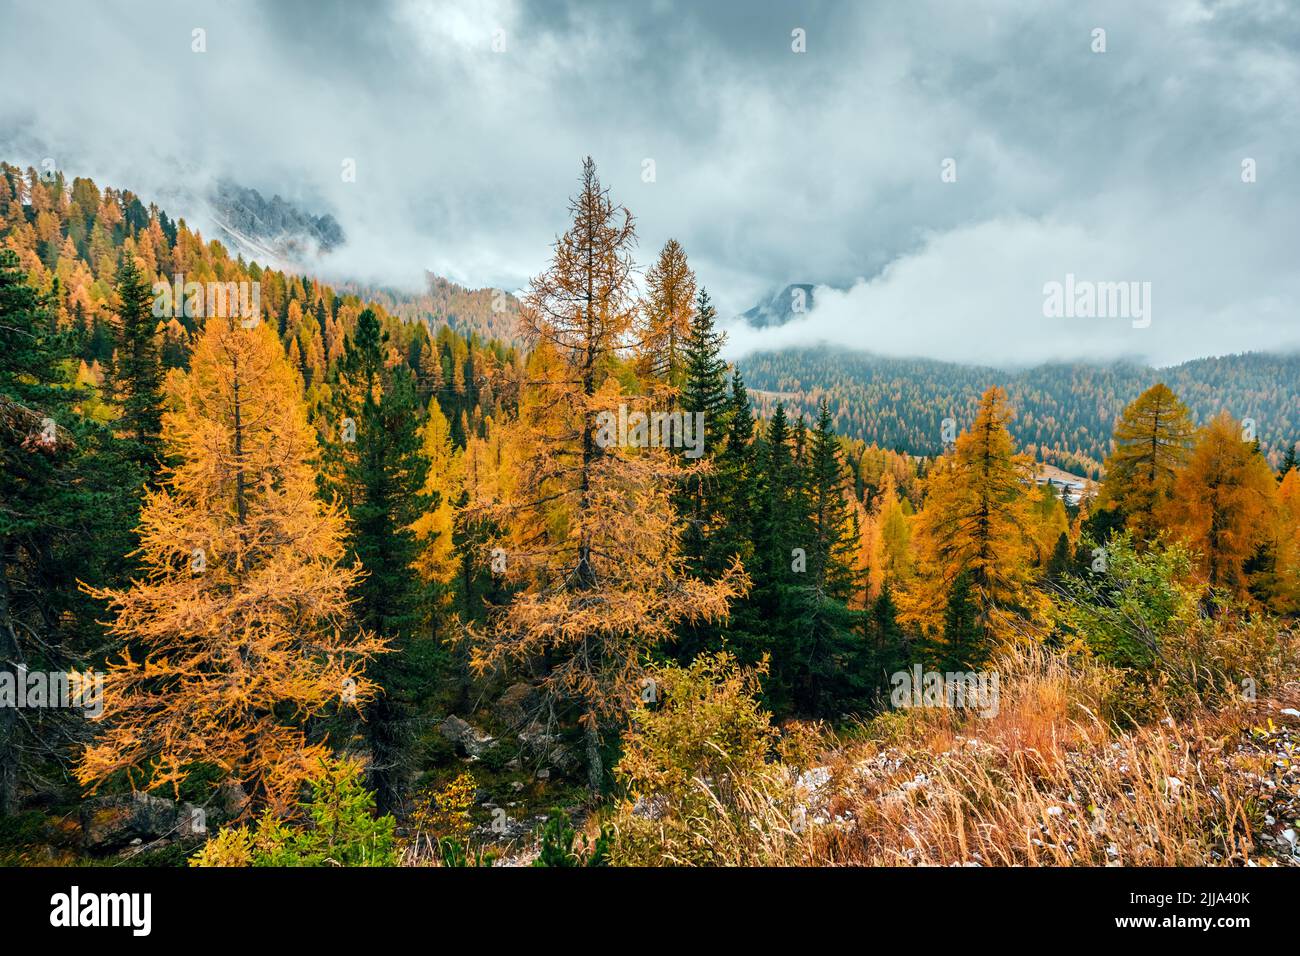 Incredible autumn view at Italian Dolomite Alps. Orange larches forest and foggy mountains peaks on background. Dolomites, Italy. Landscape photography Stock Photo